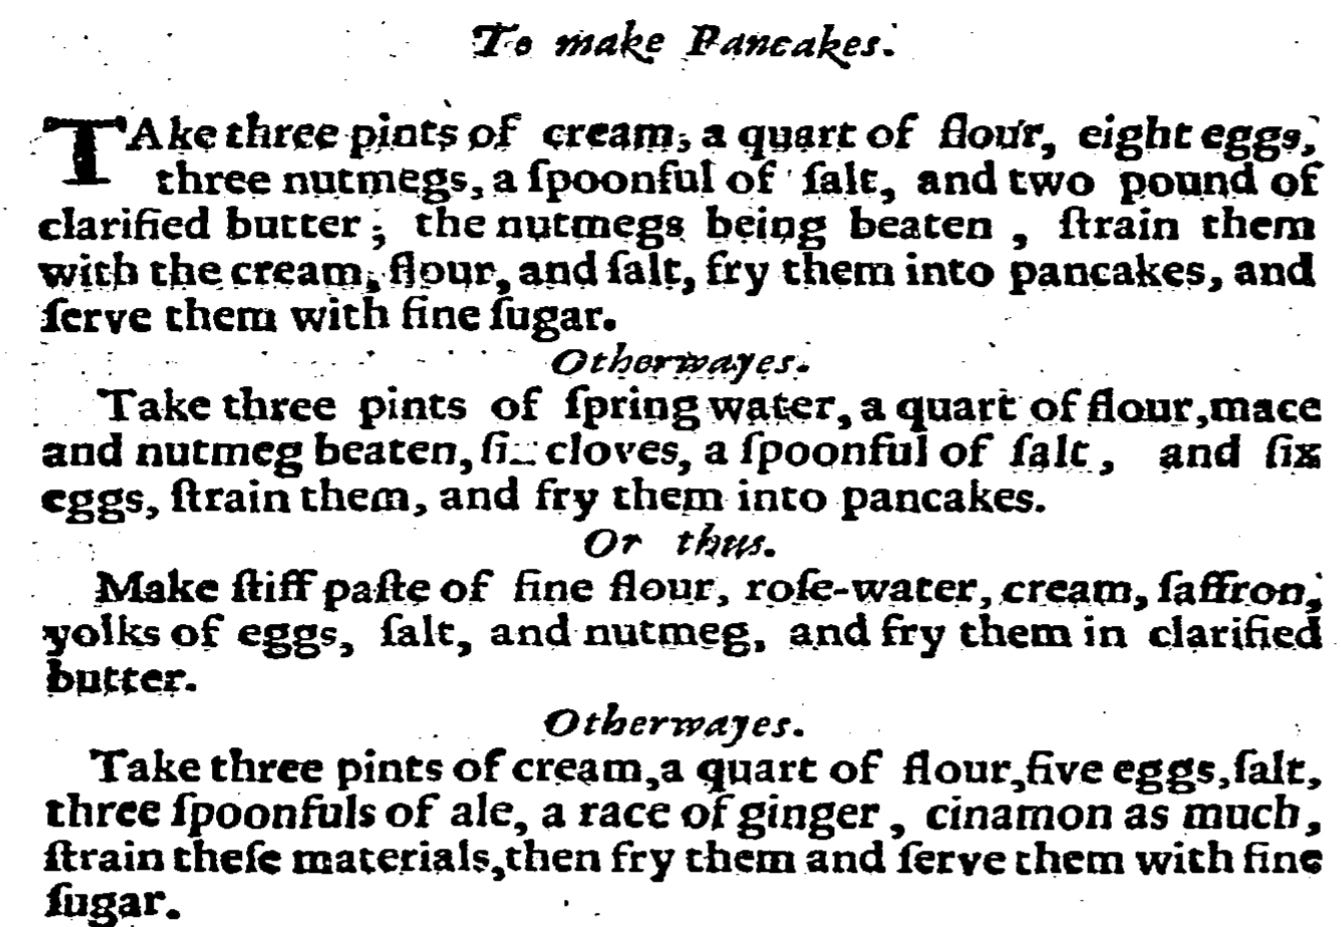 To make Pancakes. Take three pints of cream, a quart of flour, eight eggs, three nutmegs, a spoonful of salt, and two pound of clarified butter; the nutmegs being beaten, strain them with the cream, flour and salt, fry them into pancakes, and serve them with fine sugar. Otherways. Take three pints of spring-water, a quart of flour, mace, and nutmeg beaten, six cloves, a spoonful of salt, and six eggs, strain them and fry them into Pancakes. Or thus. Make stiff paste of fine flour, rose-water, cream, saffron, yolks of eggs, salt, and nutmeg, and fry them in clarified butter. Otherways. Take three pints of cream, a quart of flour, five eggs, salt, three spoonfuls of ale, a race of ginger, cinamon as much, strain these materials, then fry and serve them with fine sugar.